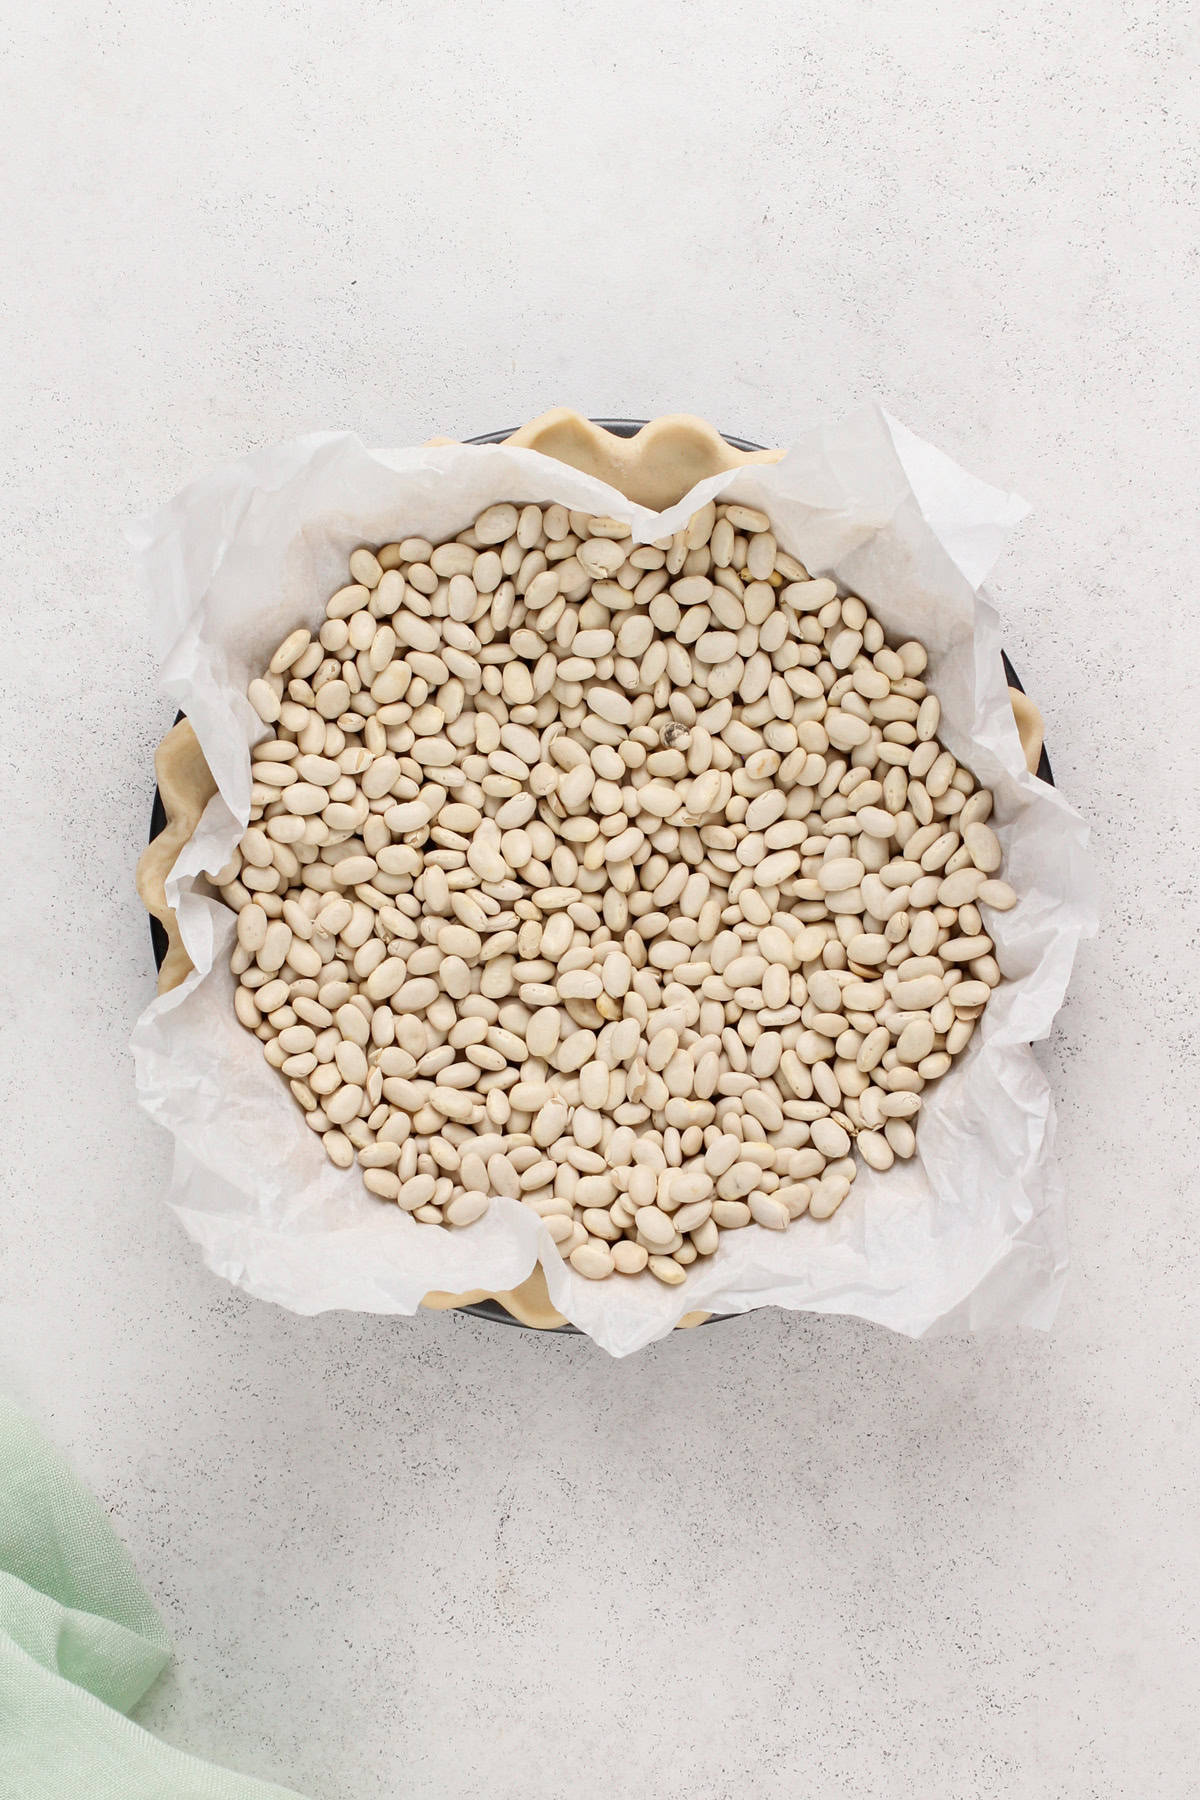 Dry beans in a parchment-lined pie crust for blind baking.